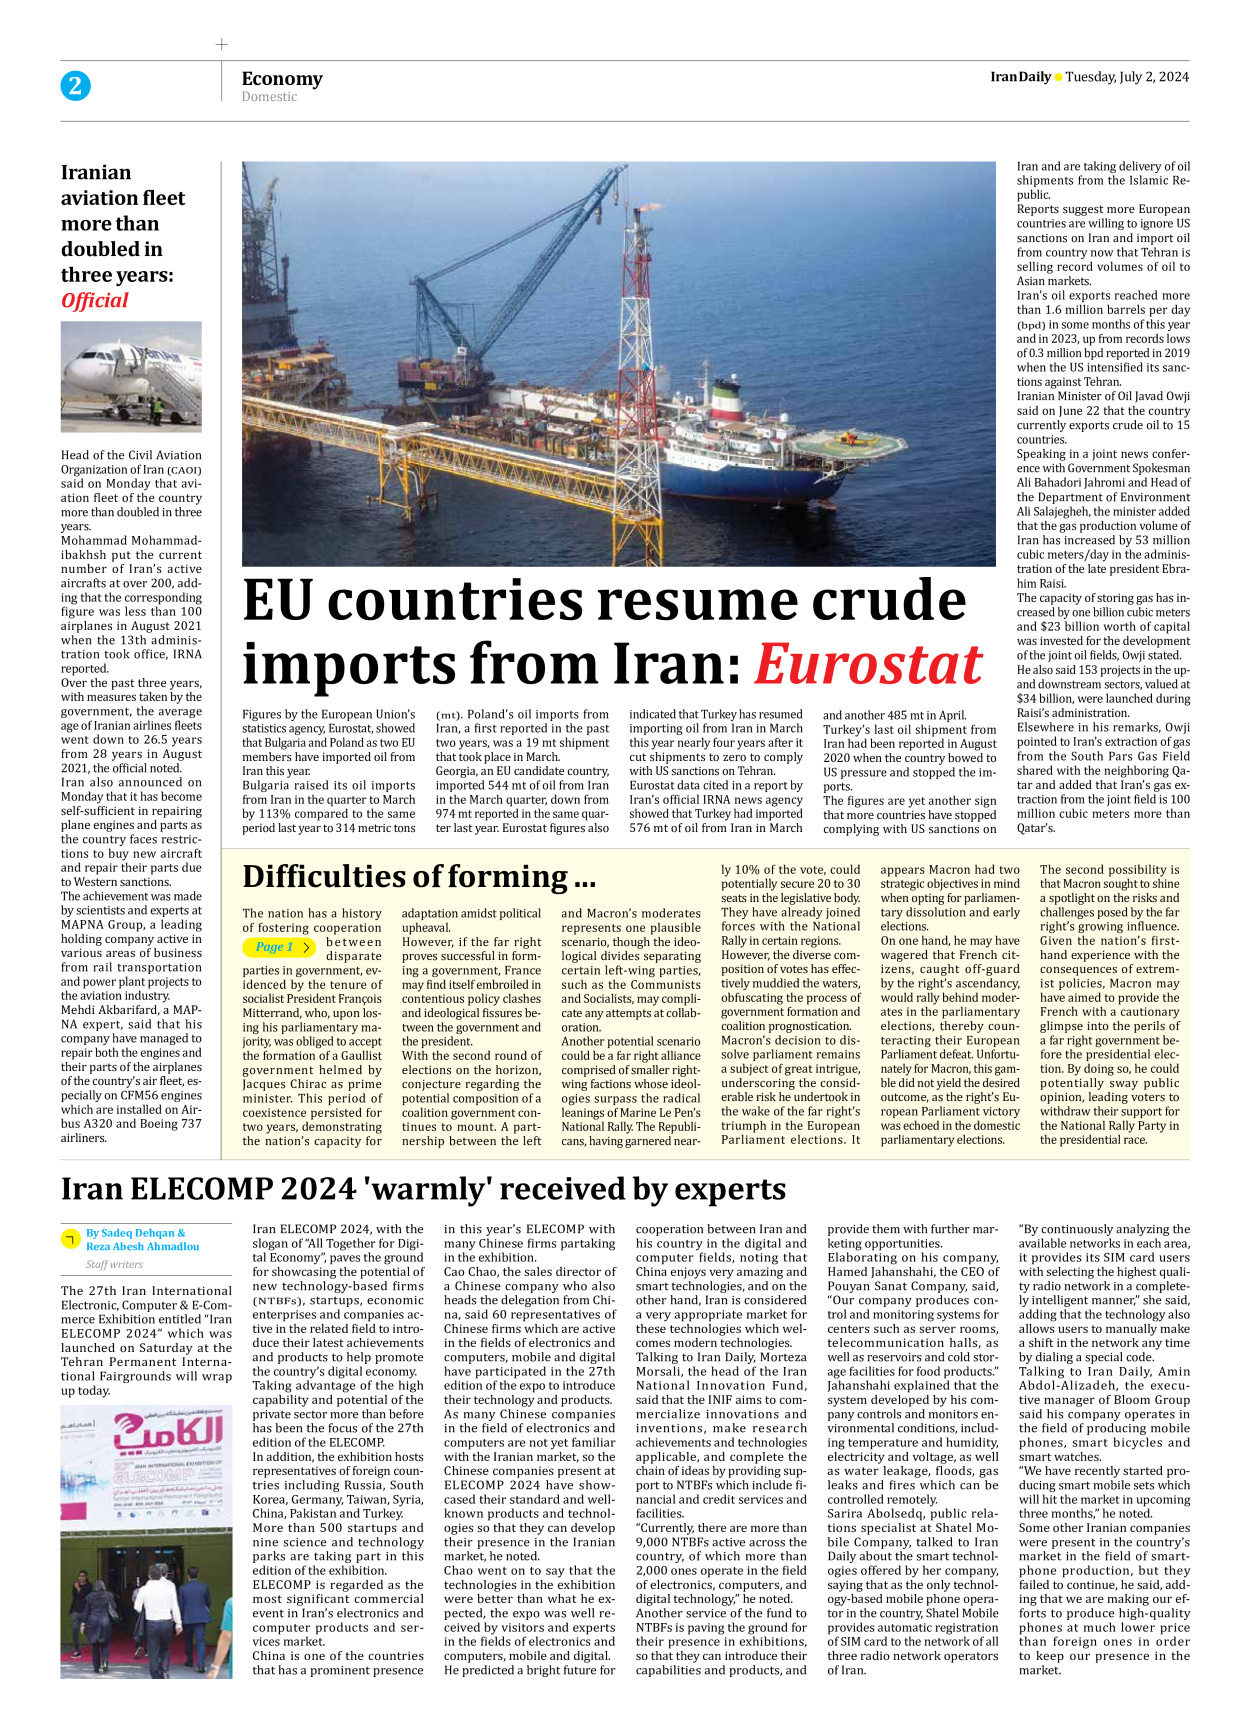 Iran Daily - Number Seven Thousand Five Hundred and Ninety Four - 02 July 2024 - Page 2